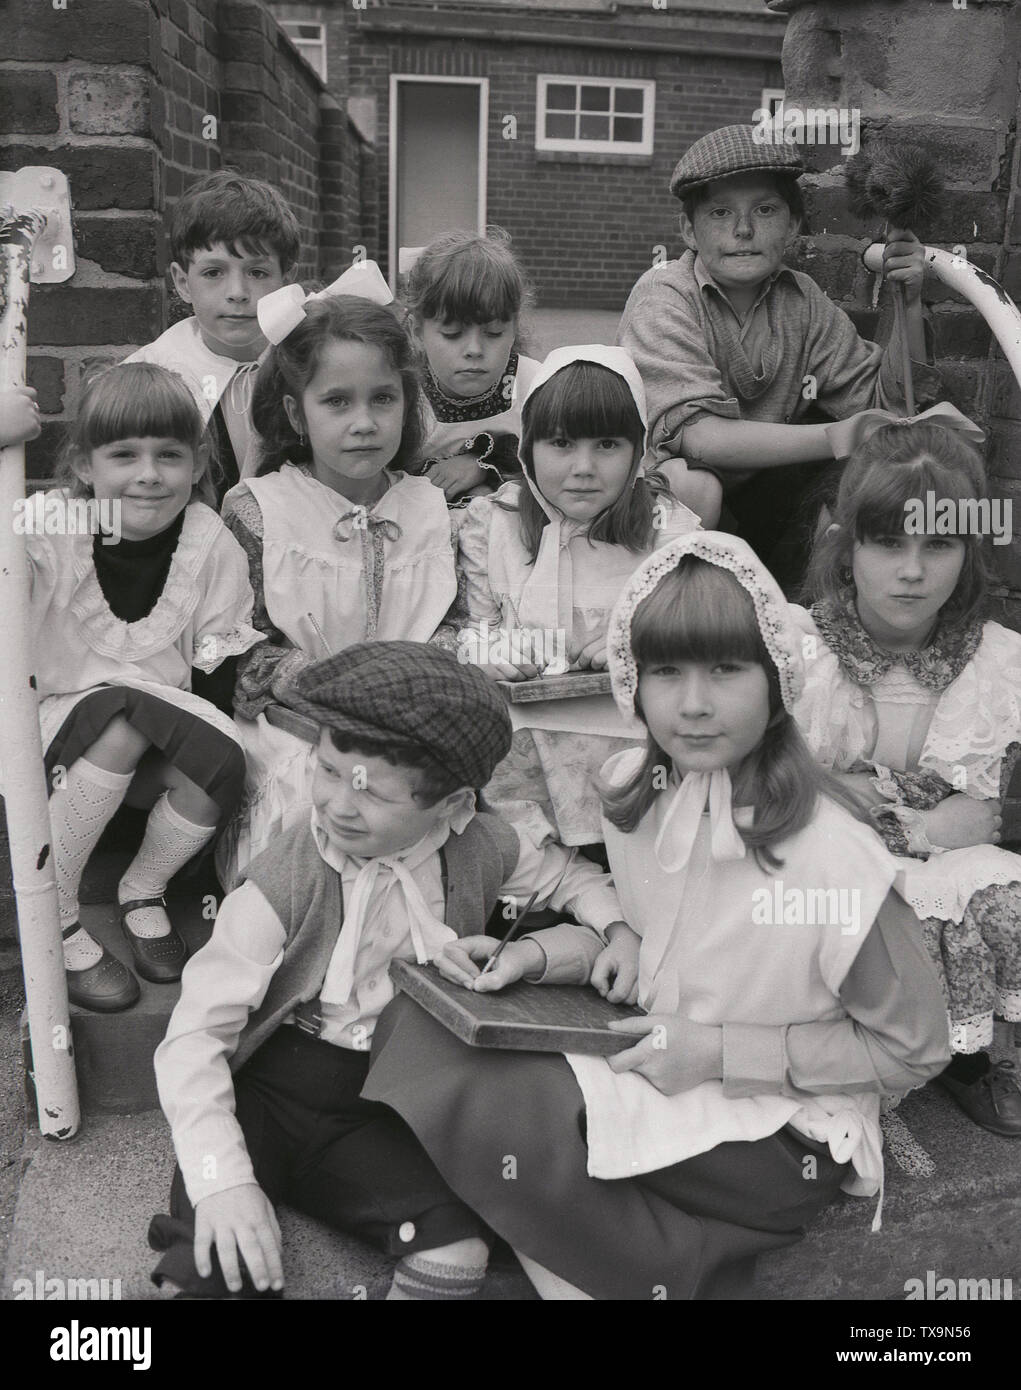 1980s, group of young school children dressed up in the clothes of those who went to a village primary school from yesteryear, 100 years ago, Yorkshire, England, UK. Stock Photo